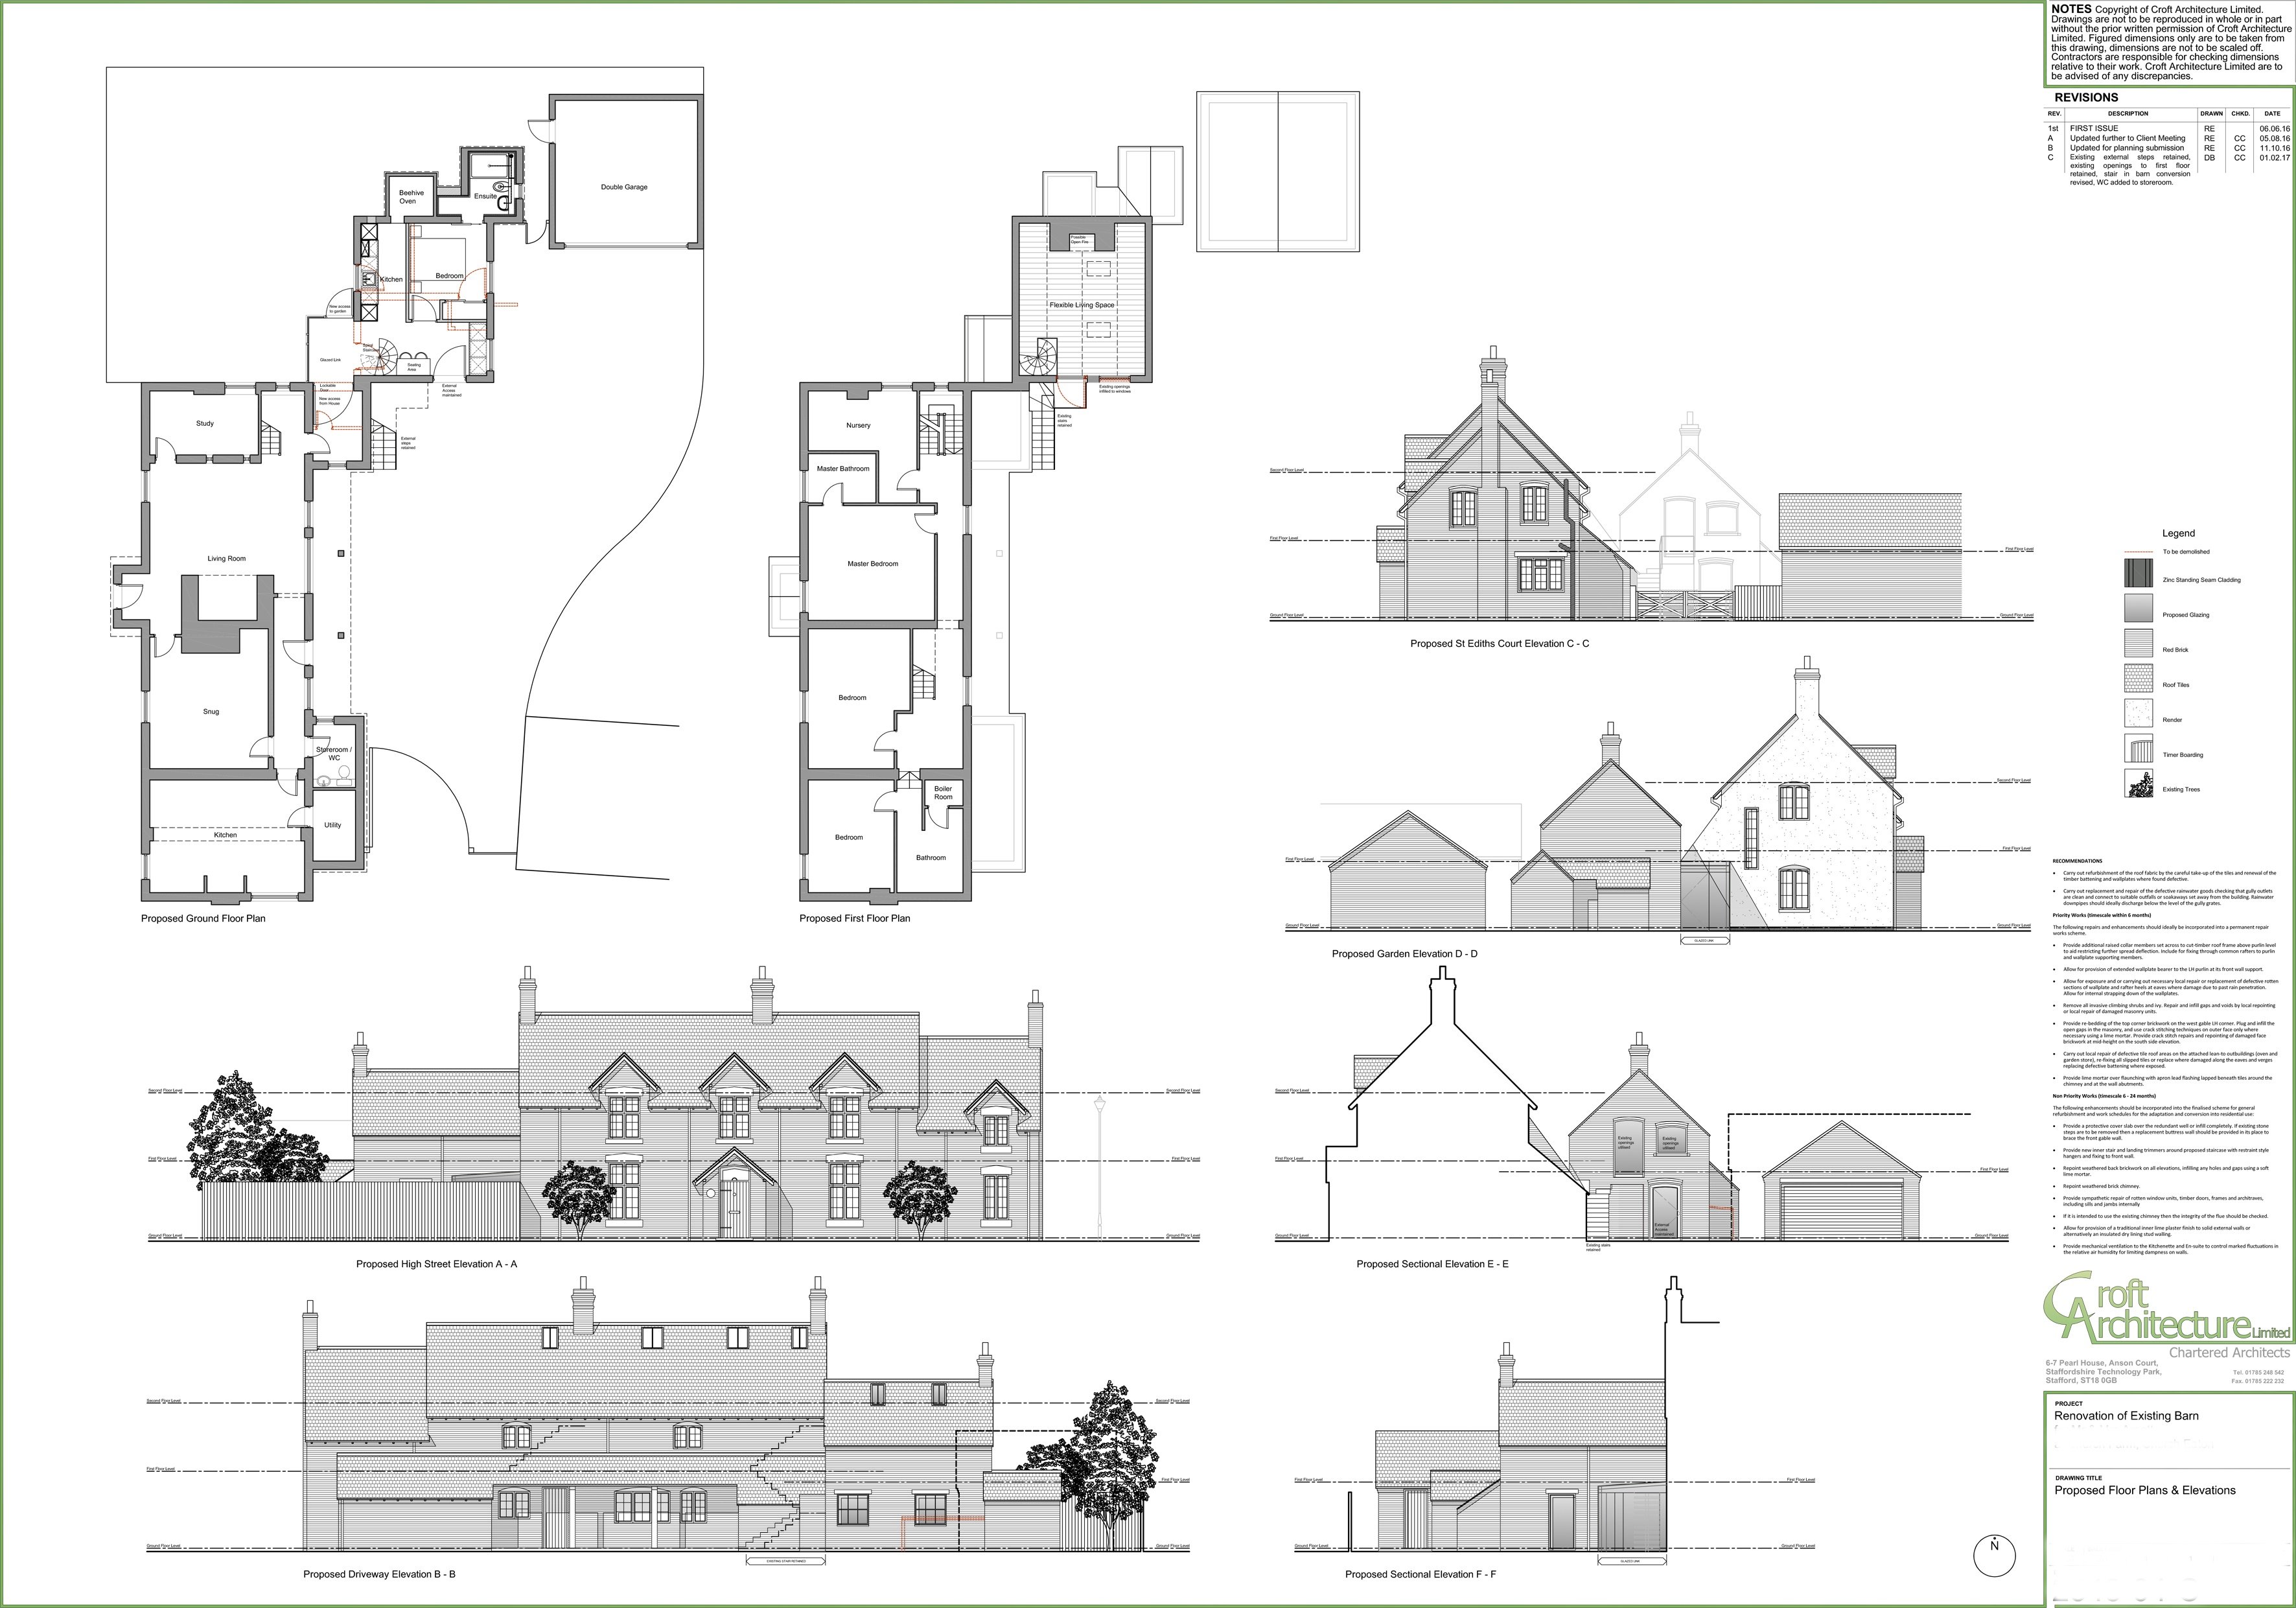 Croft Architecture Barn Conversion Planning Drawings